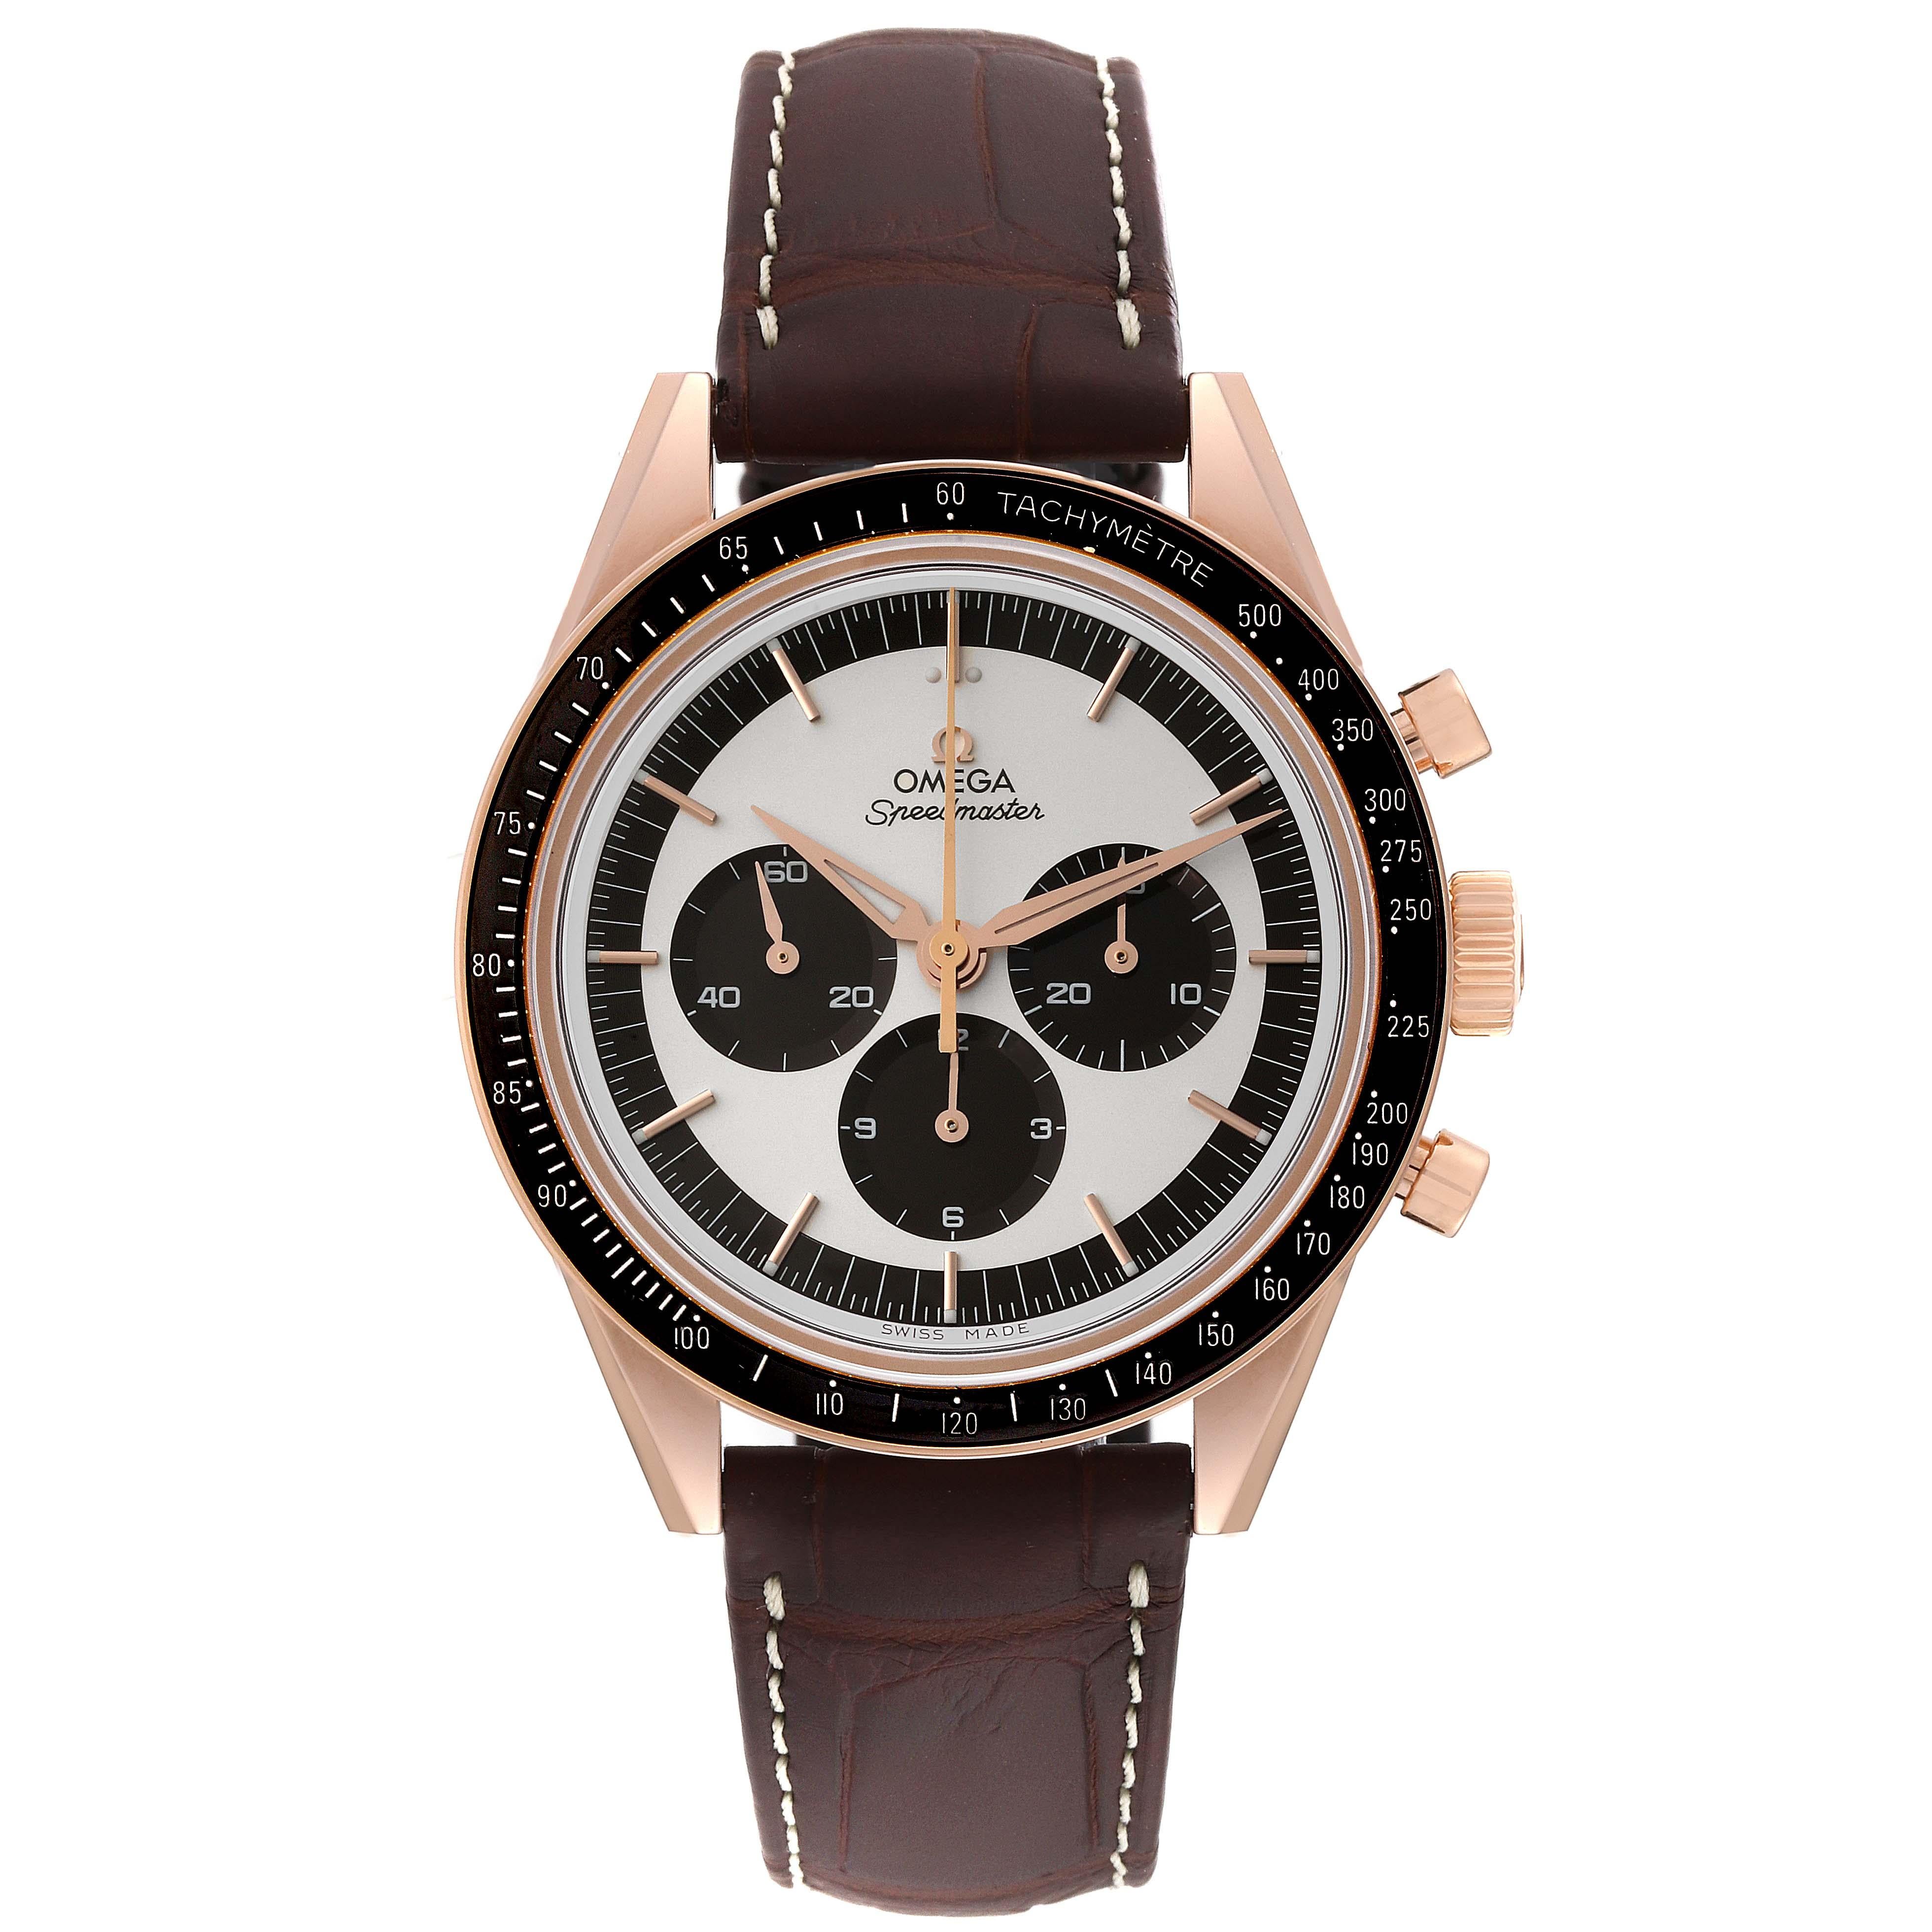 Omega Speedmaster First In Space Rose Gold Mens Watch 311.63.40.30.02.001 Unworn. Manual winding chronograph movement. Caliber 1861. 18k Sedna rose gold round case 39.7 mm in diameter. The numbered edition No., 